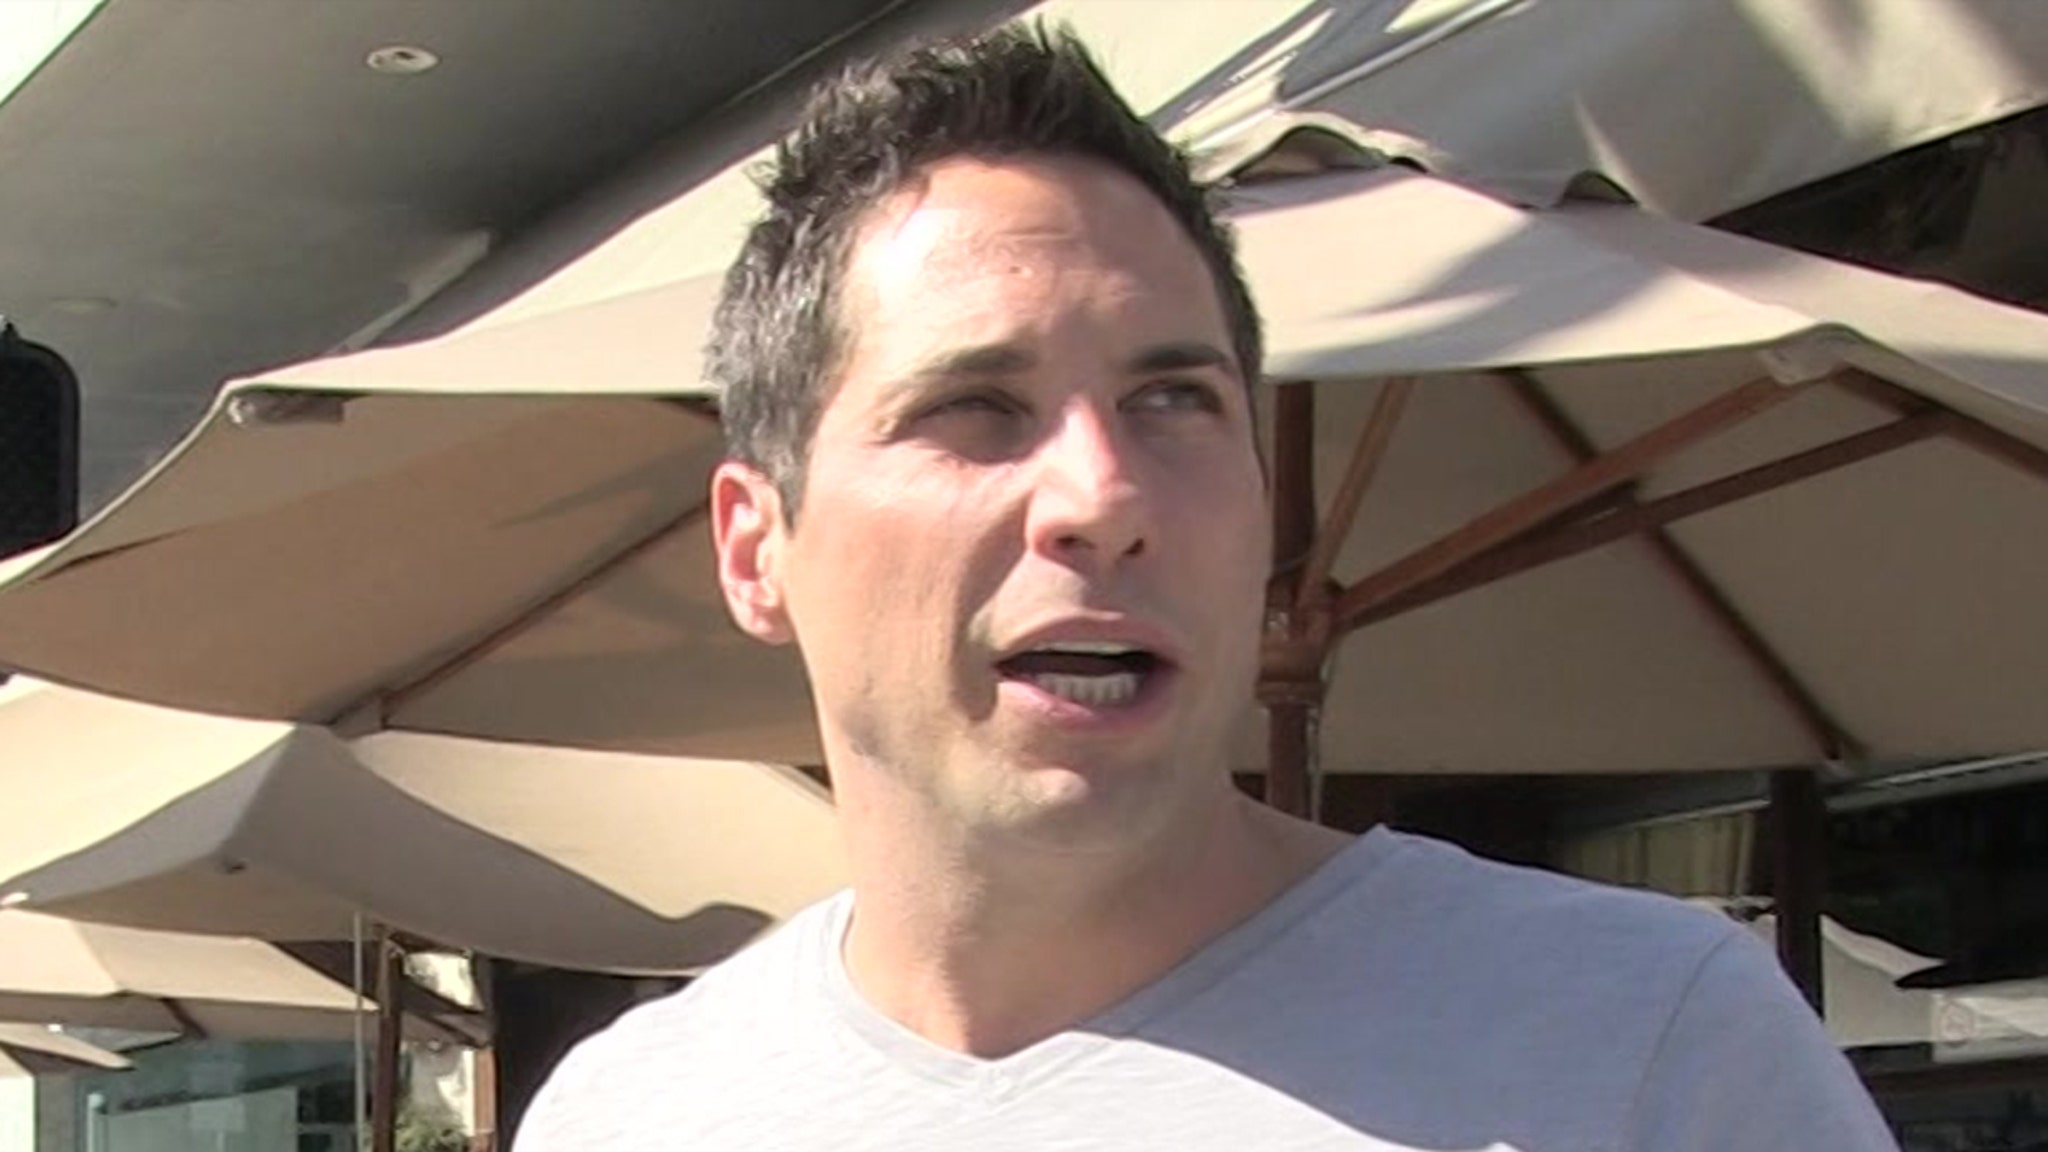 'Girls Gone Wild' Founder Joe Francis Claims Daughters Are Missing, Mom Charged